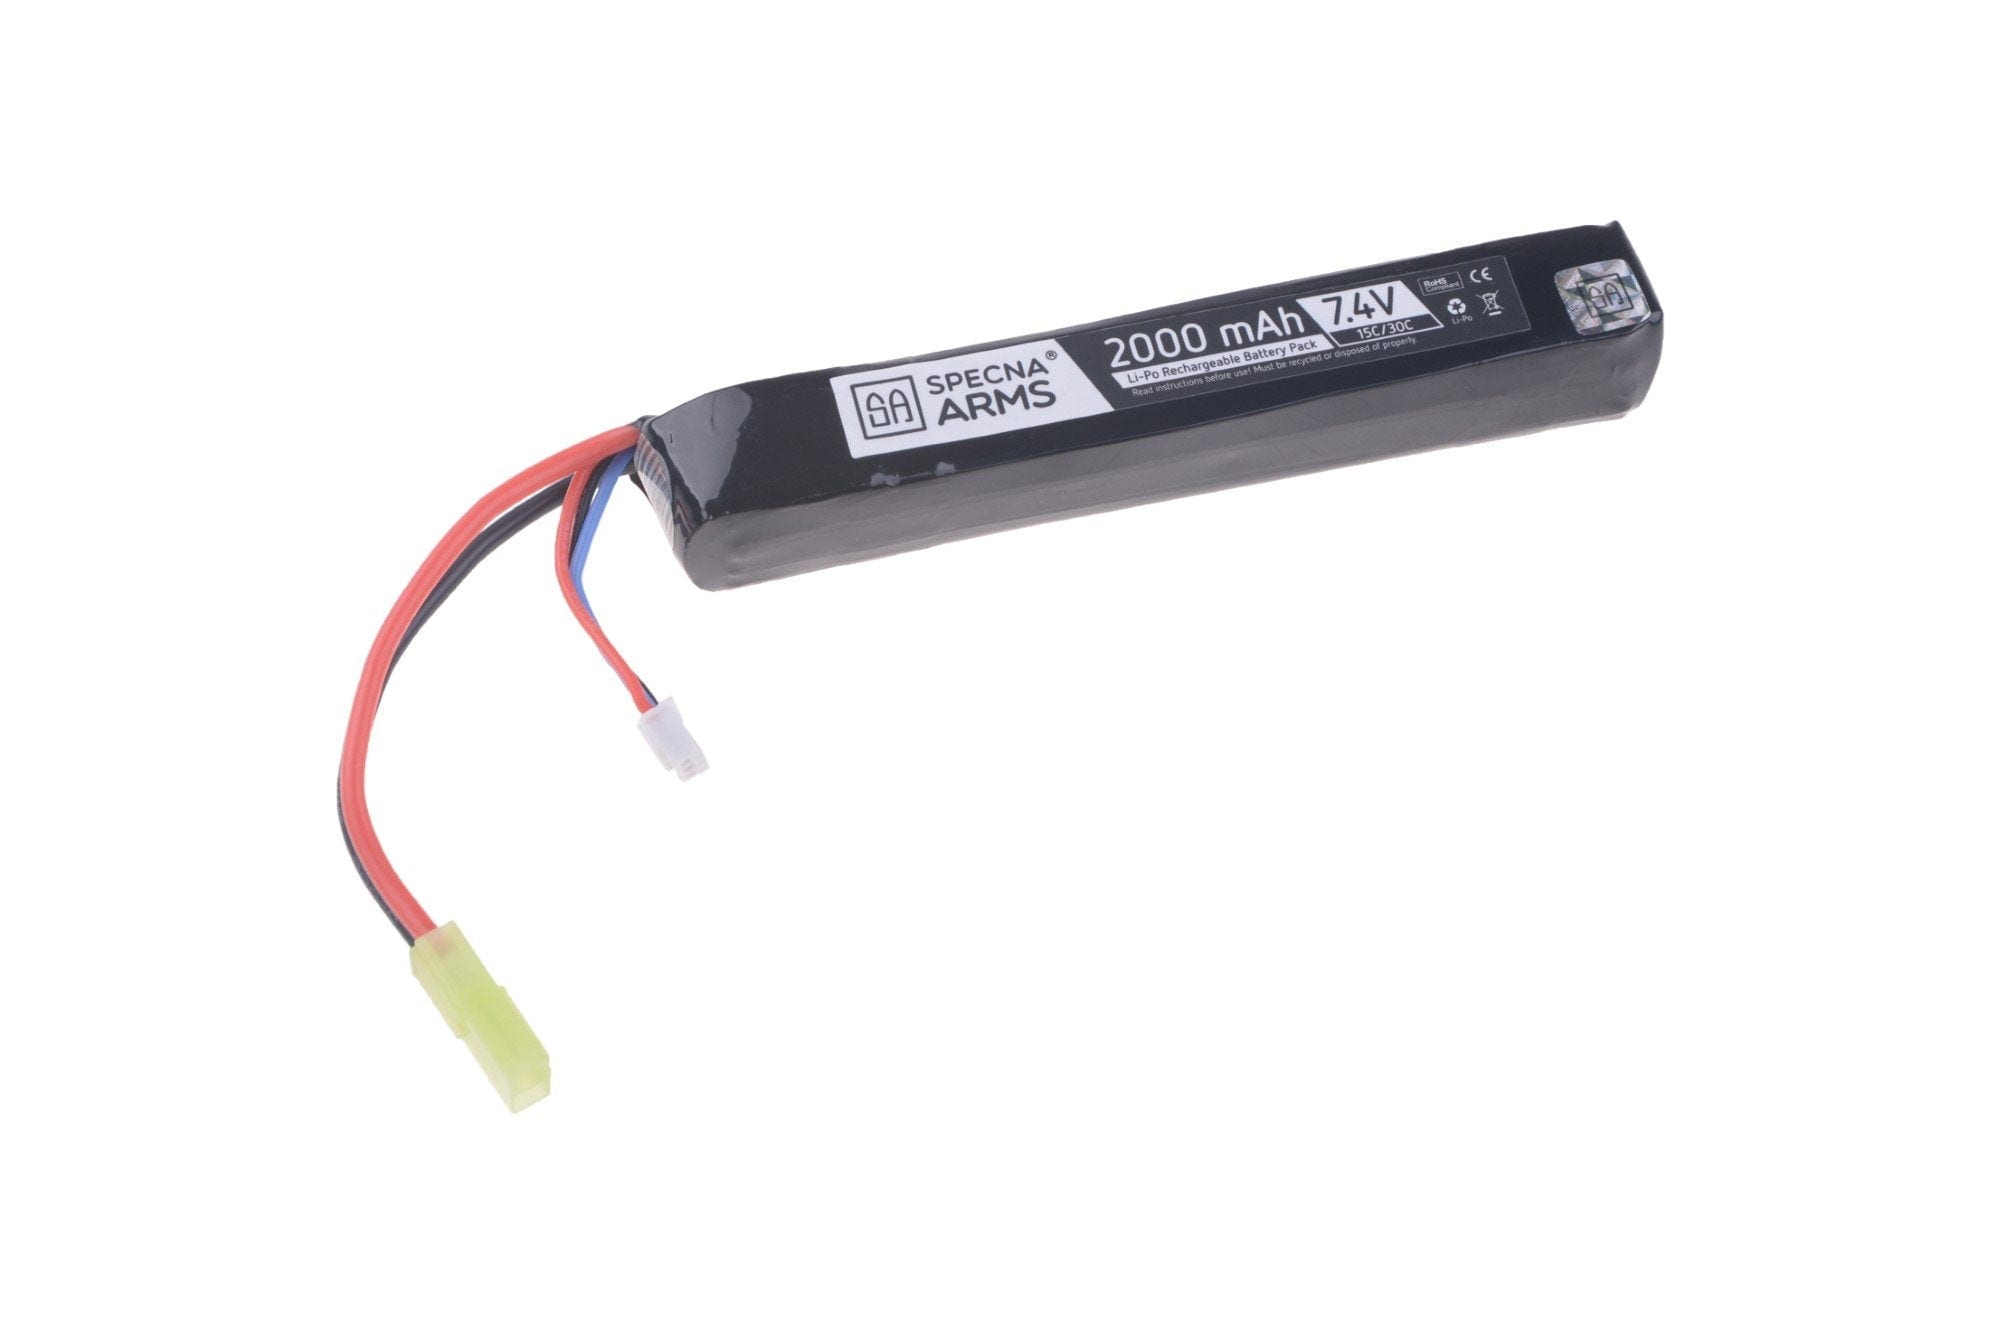 7.4V 2000mAh LiPo battery 15 / 30C by Specna Arms on Airsoft Mania Europe